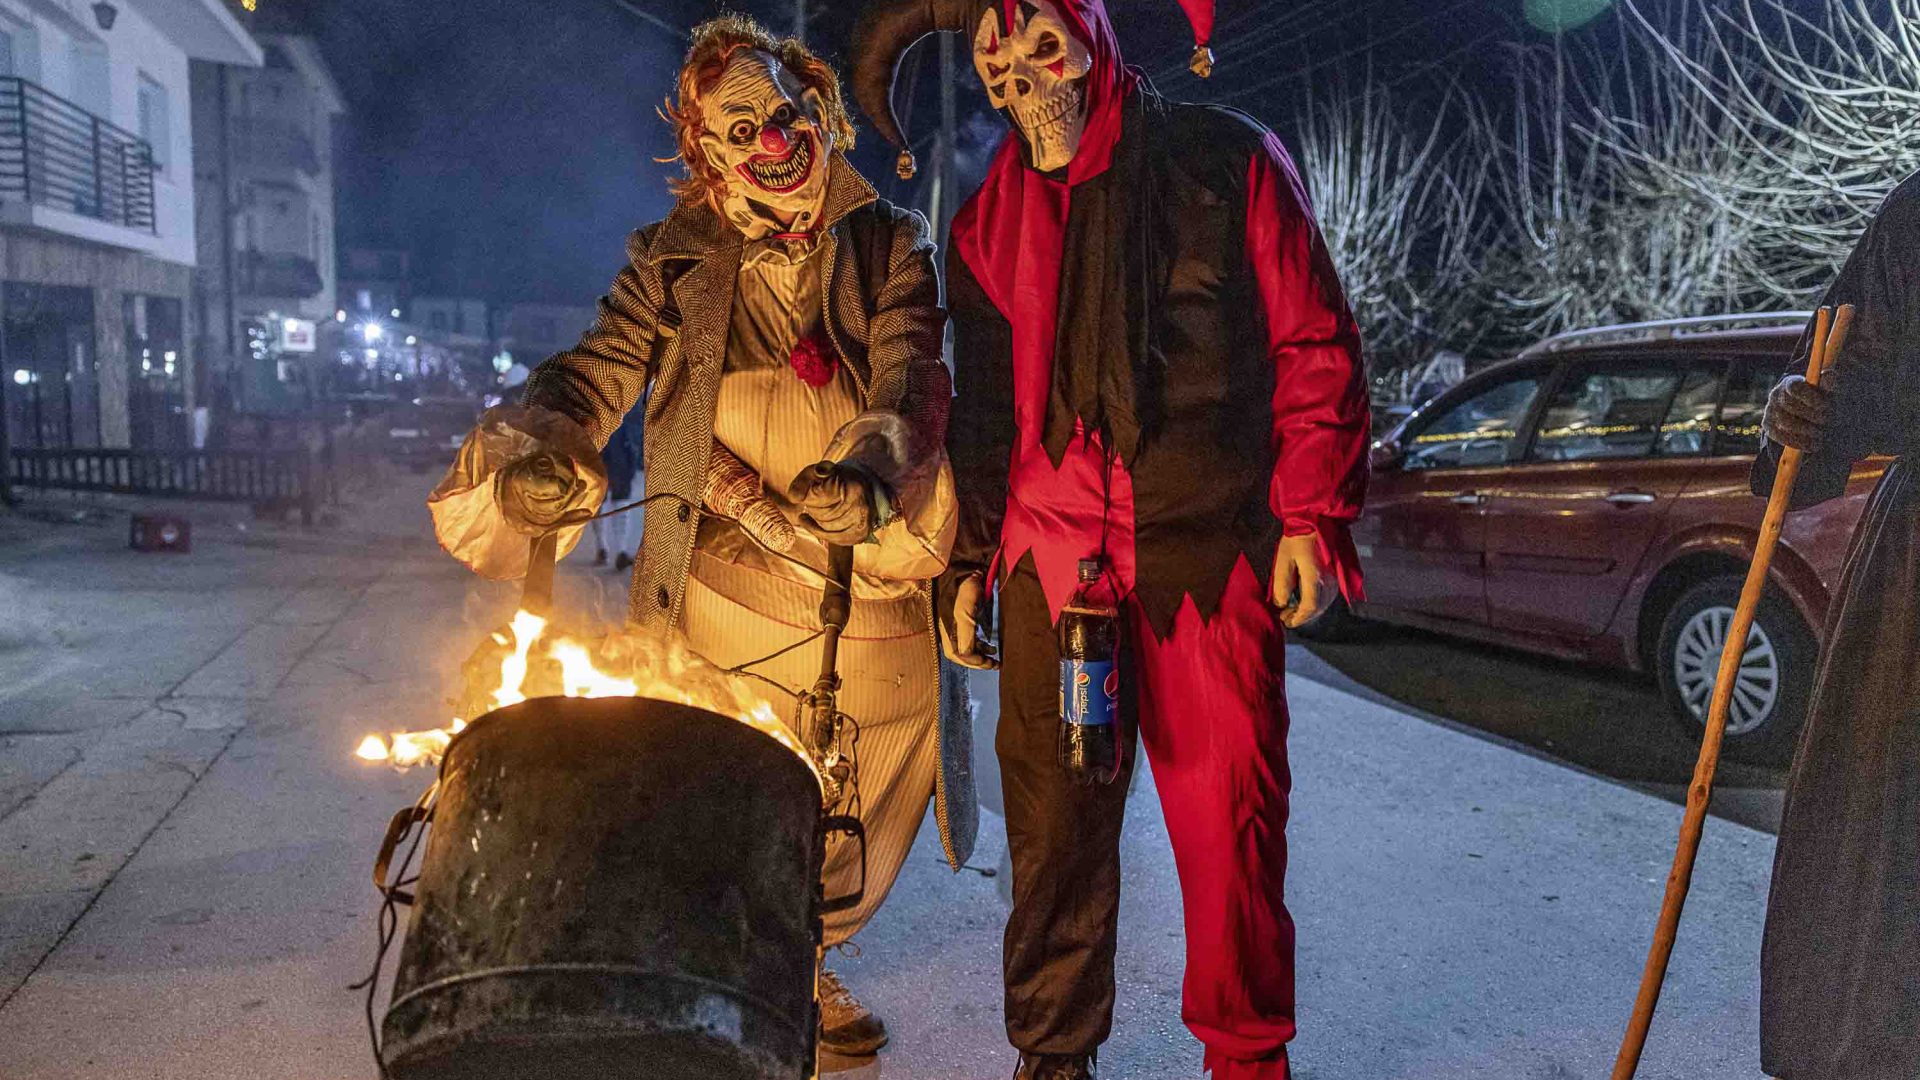 Two people in costume push a burning stroller.